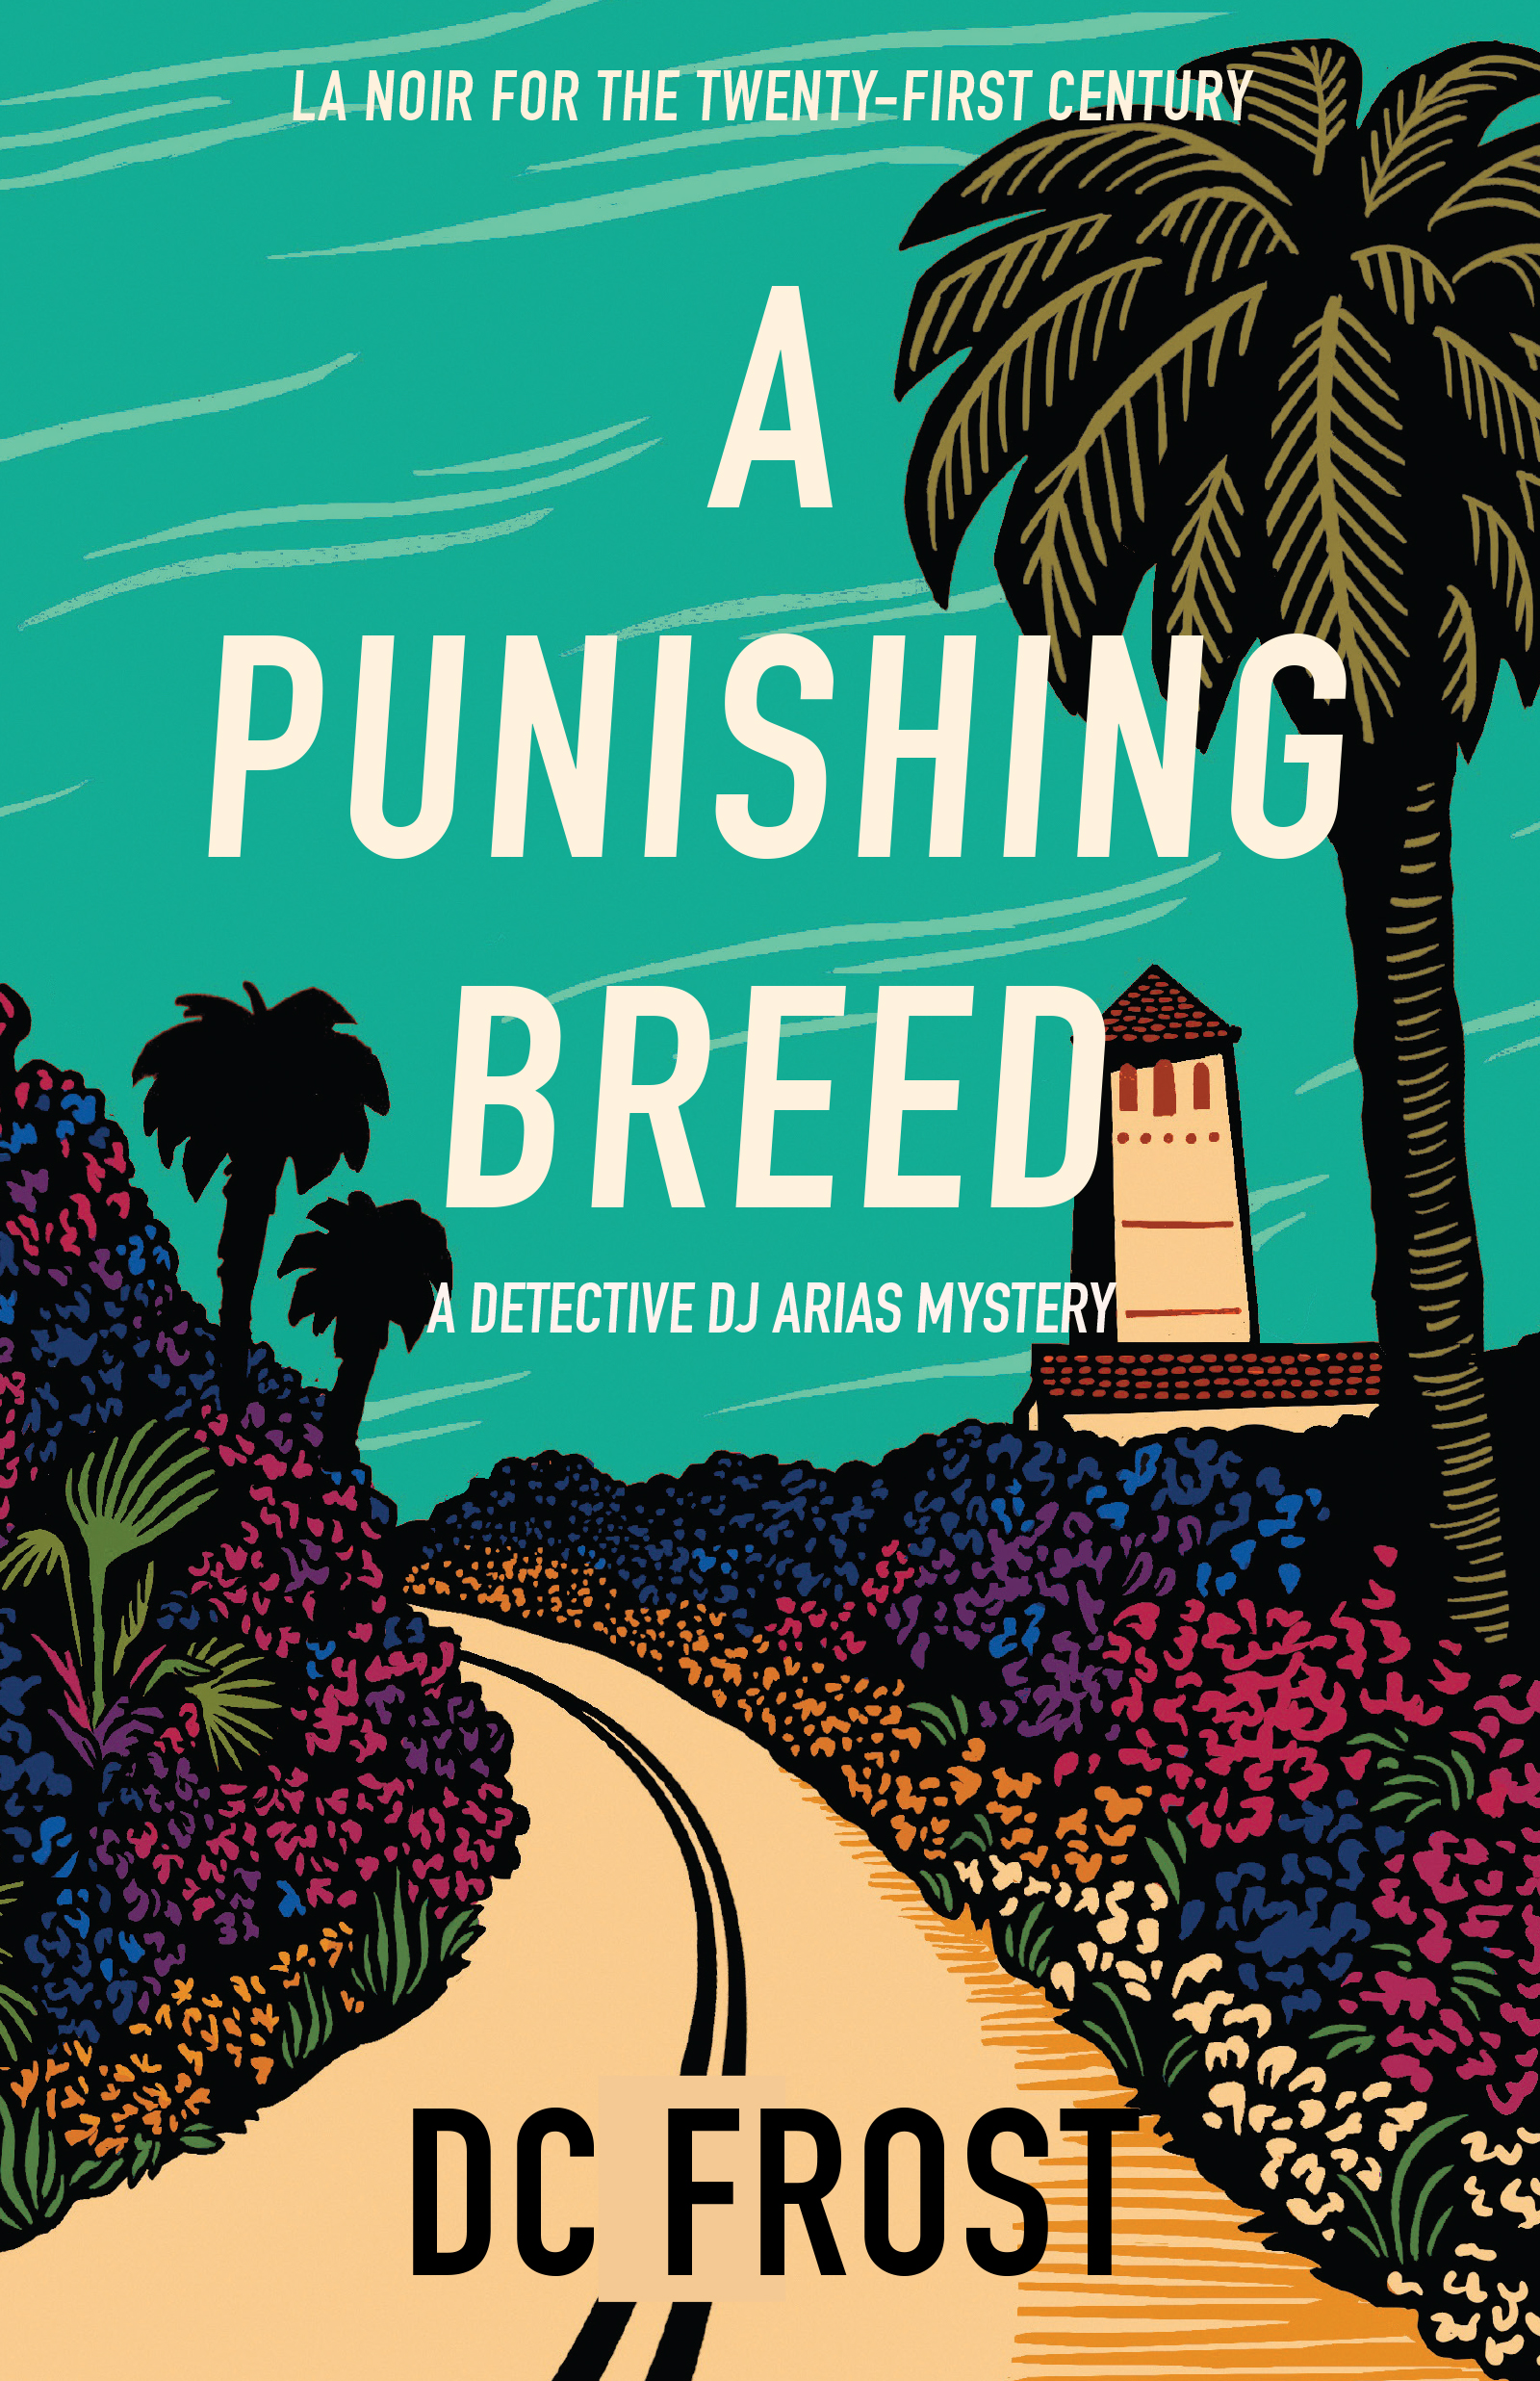 An illustrated cover of a coastal road surrounded by colorful flowers, with a belltower in the distance, with text saying: "LA Noir for the Twenty-First Century, A PUNISHING BREED, A Detective DJ Arias Mystery by DC Frost"